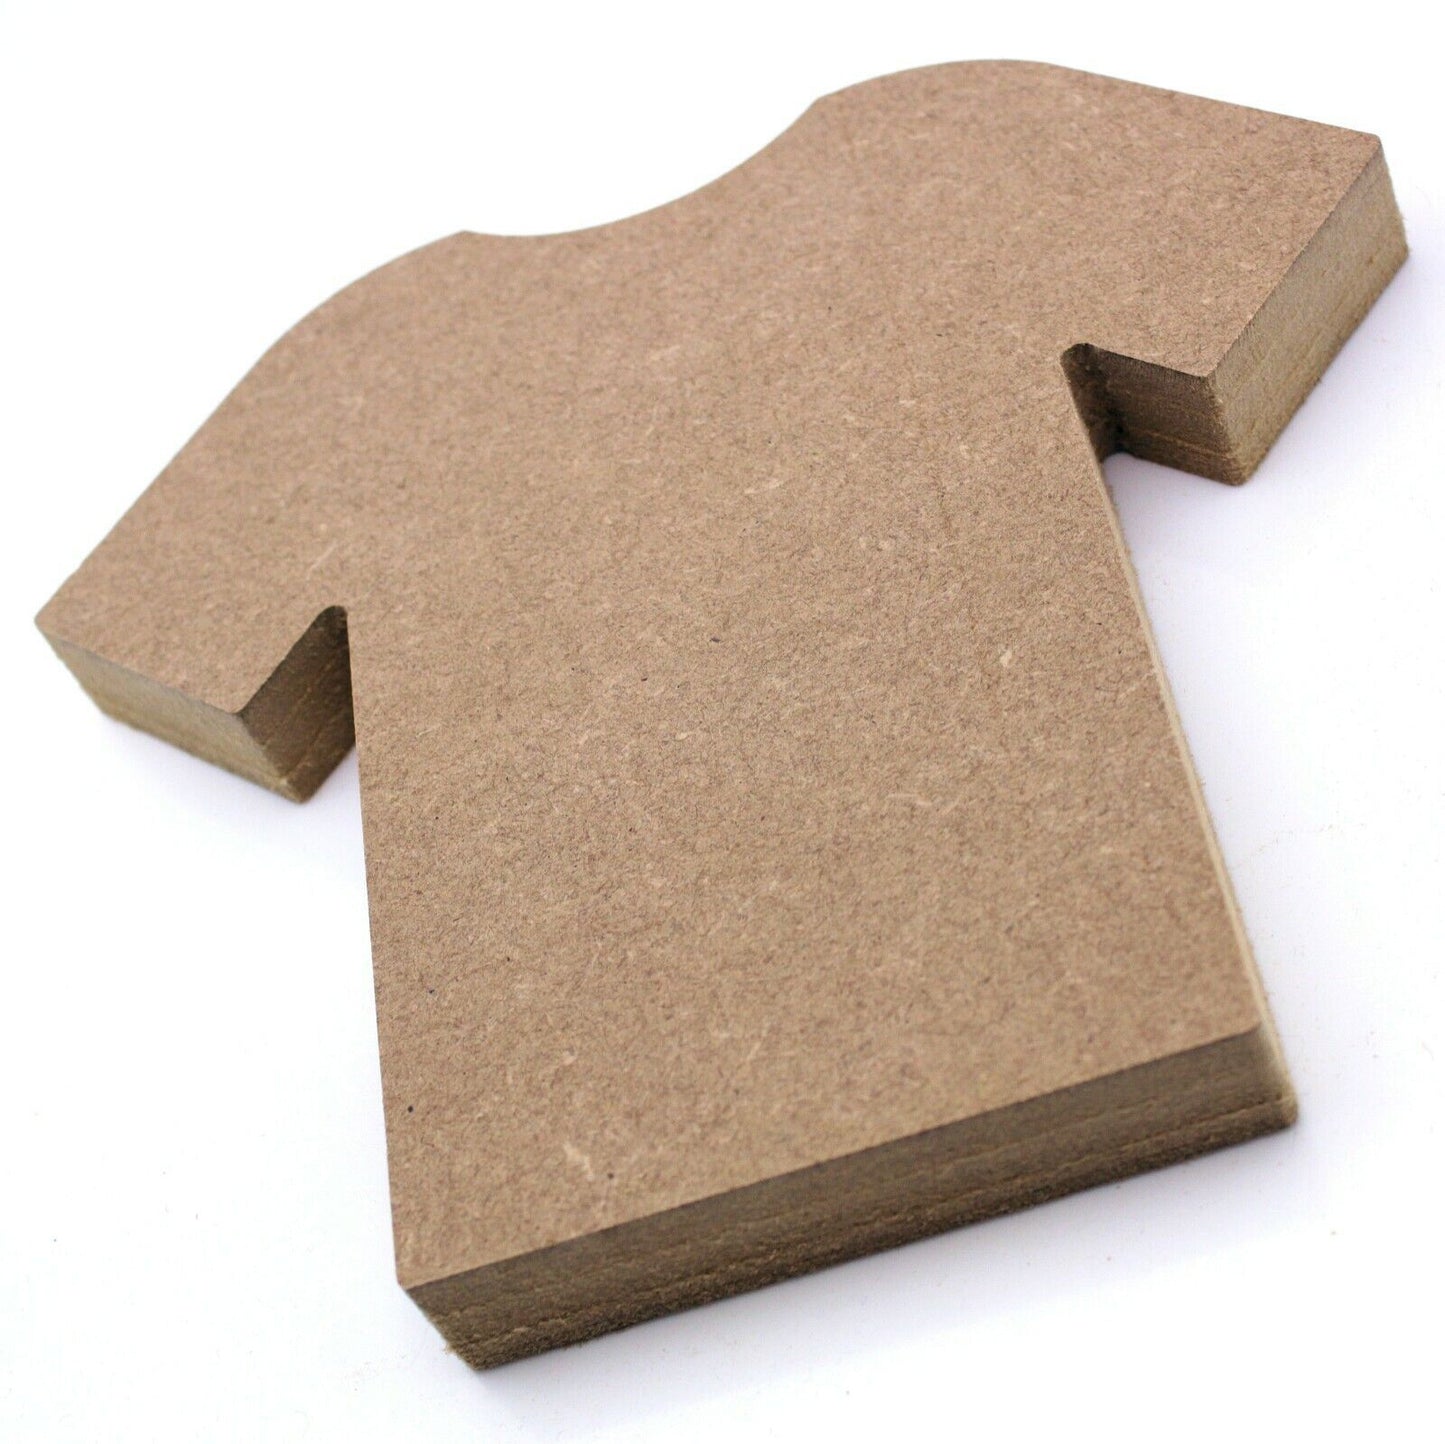 Free Standing 18mm MDF Football Shirt Craft Shape. 10cm to 30cm. FIFA World Cup